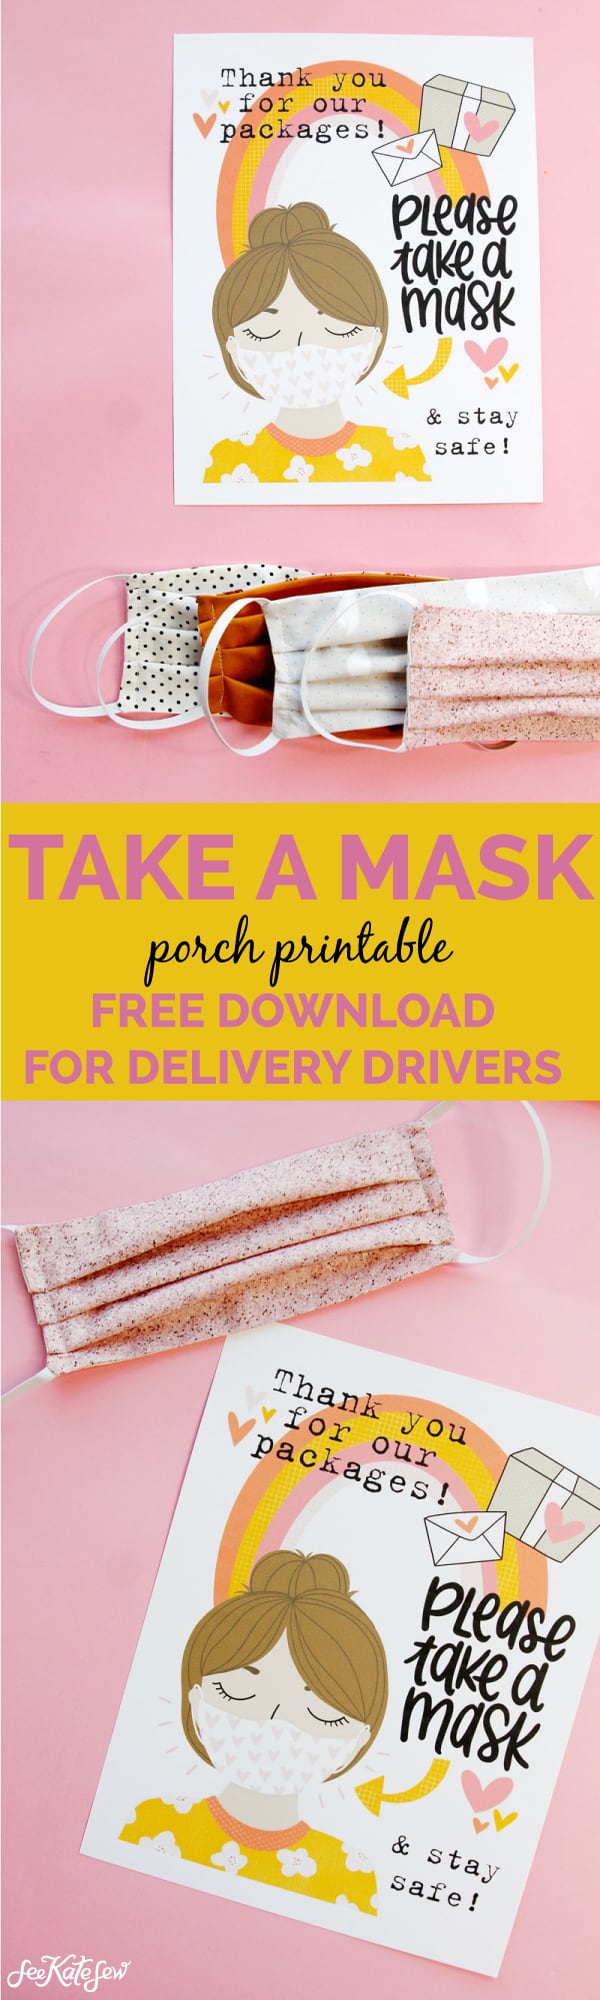 Take a Mask | Free Printable for Delivery Drivers